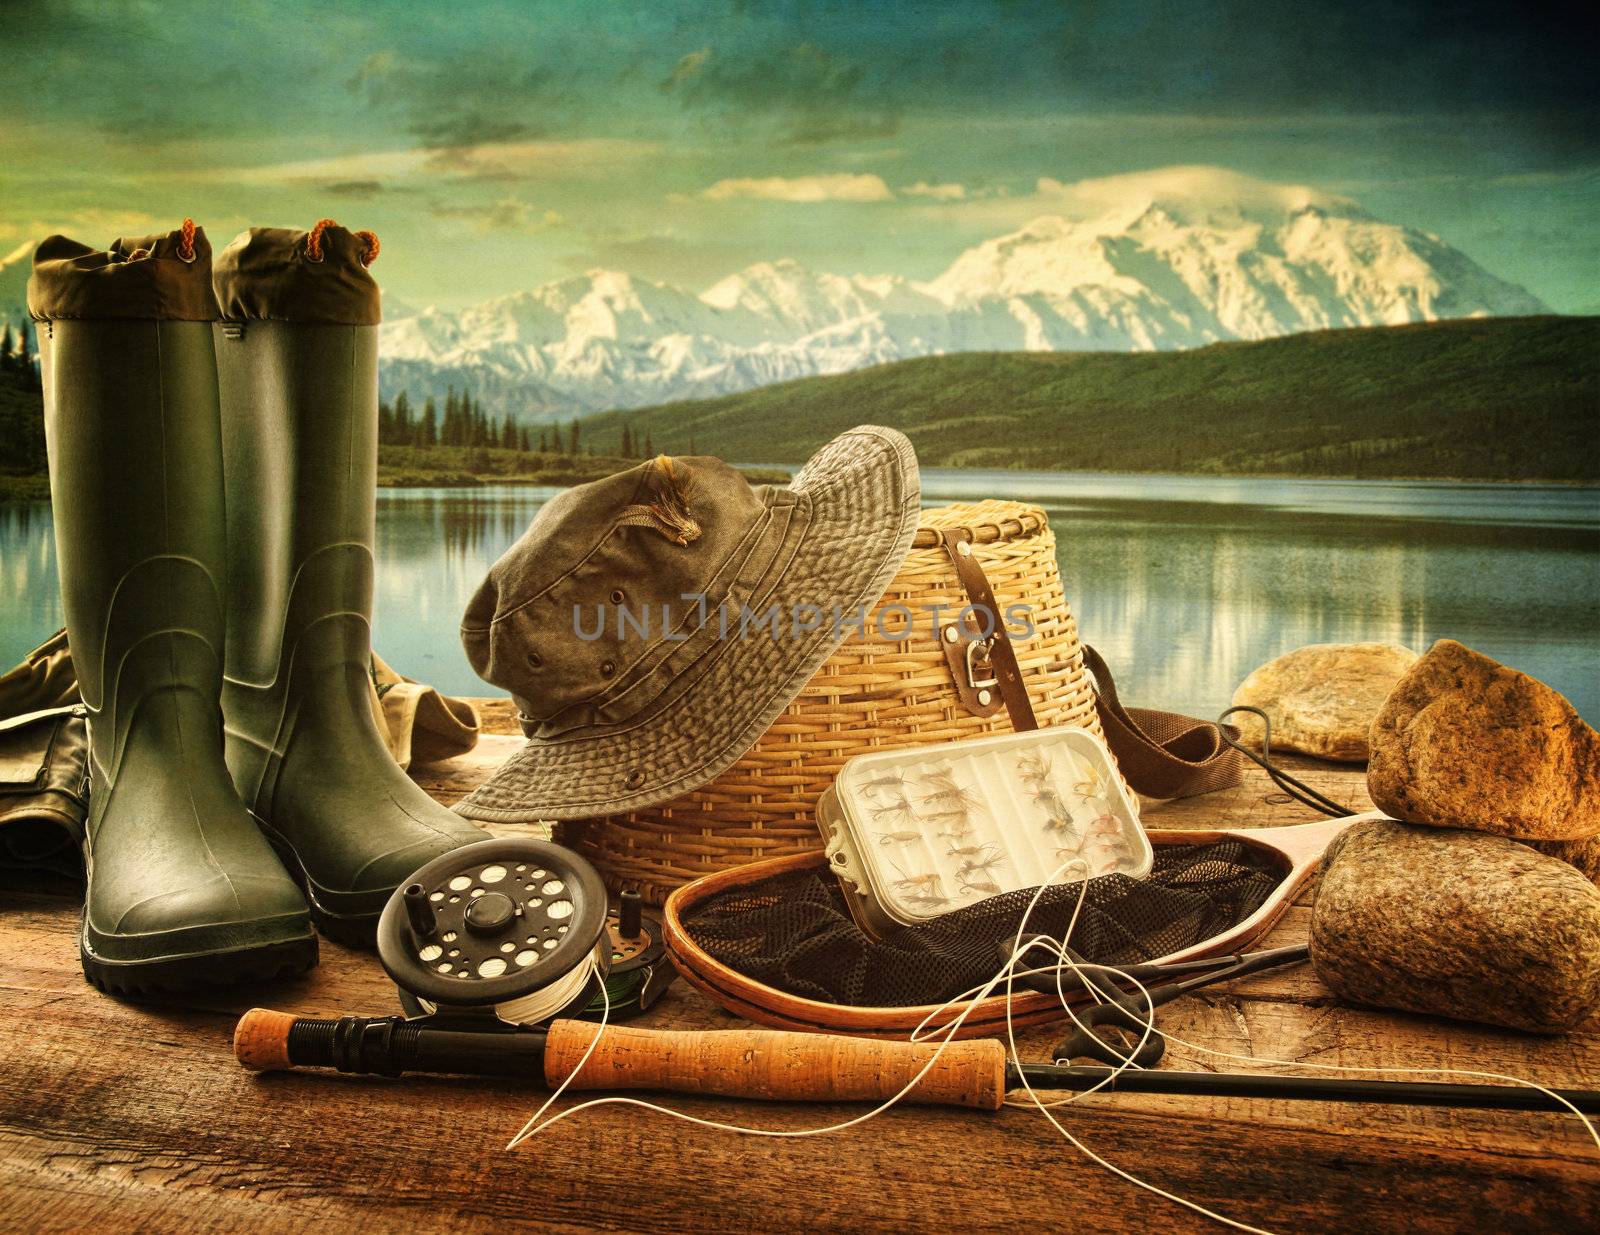 Fly fishing equipment on deck with view of a lake and mountains by Sandralise